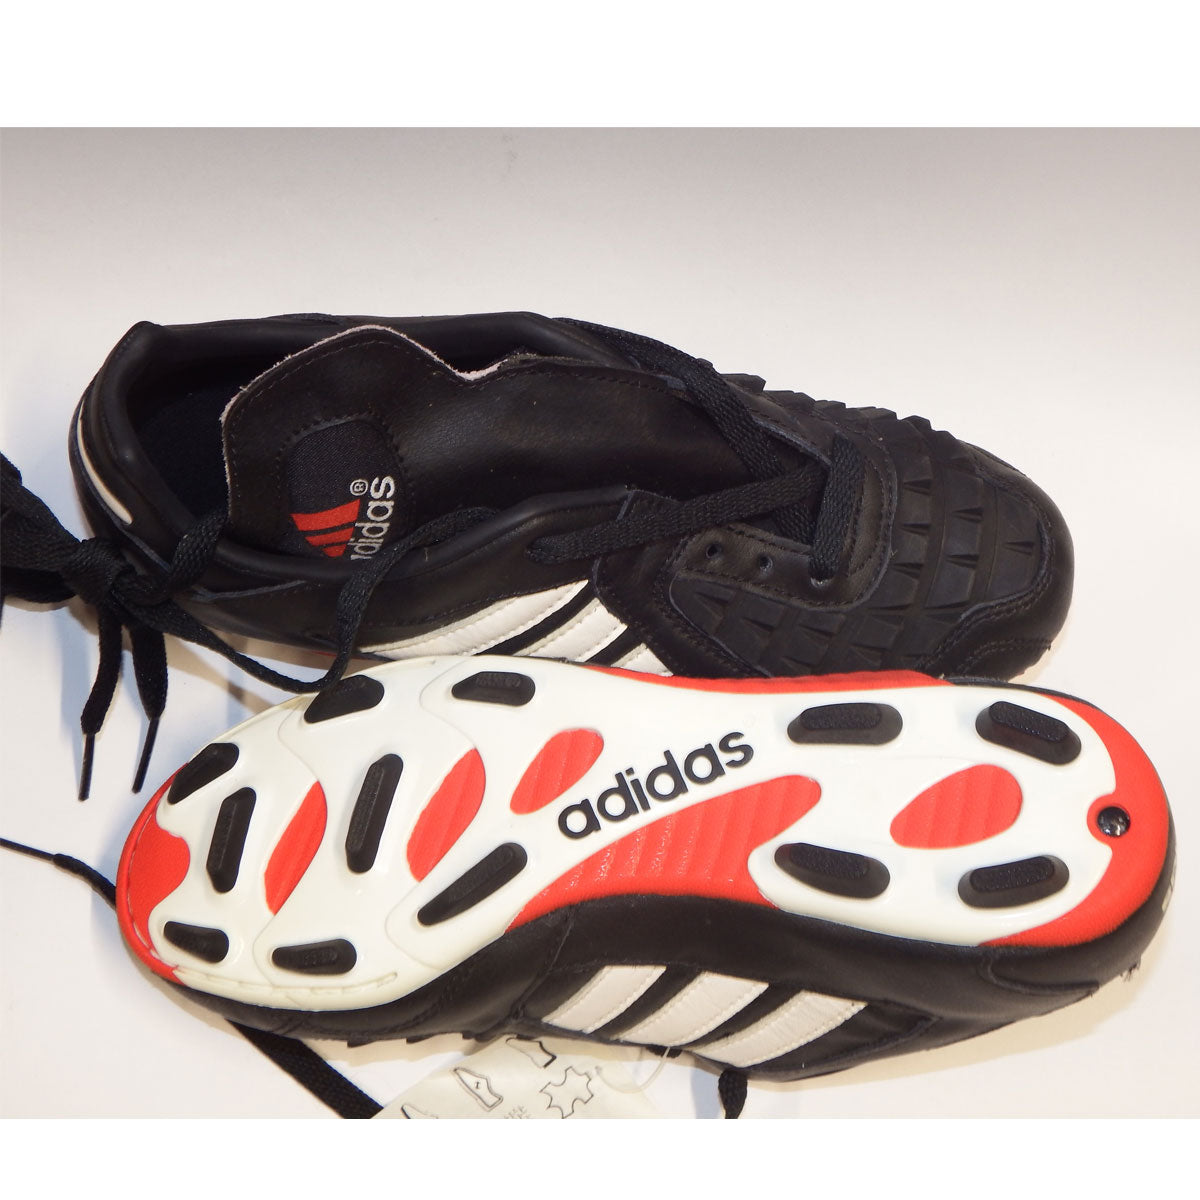 blades touch football boots